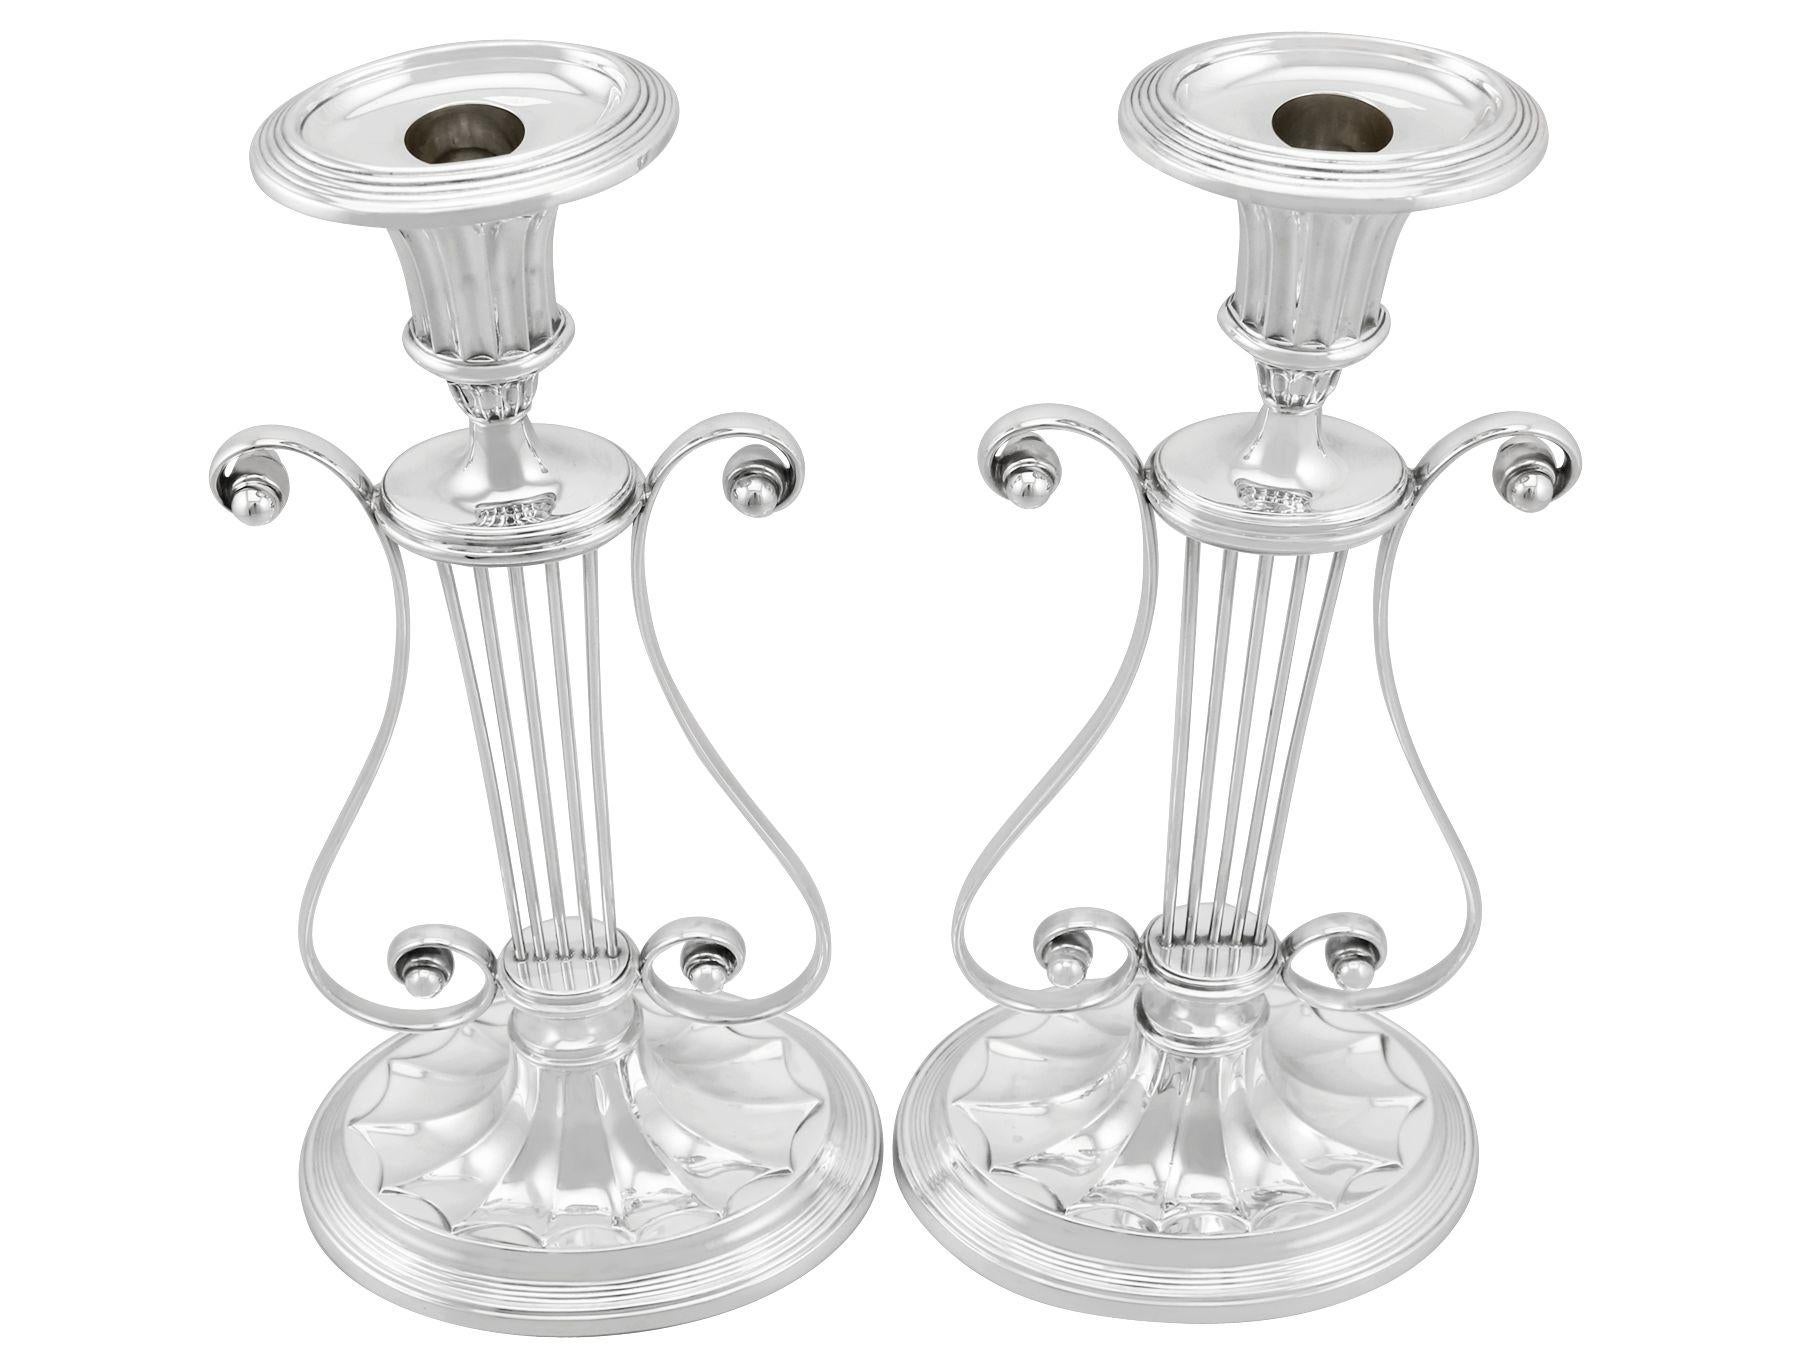 An exceptional, fine and impressive, rare pair of large antique George V English sterling silver lyre candlesticks; an addition of our ornamental silverware collection.

These exceptional antique George V English sterling silver candlesticks have